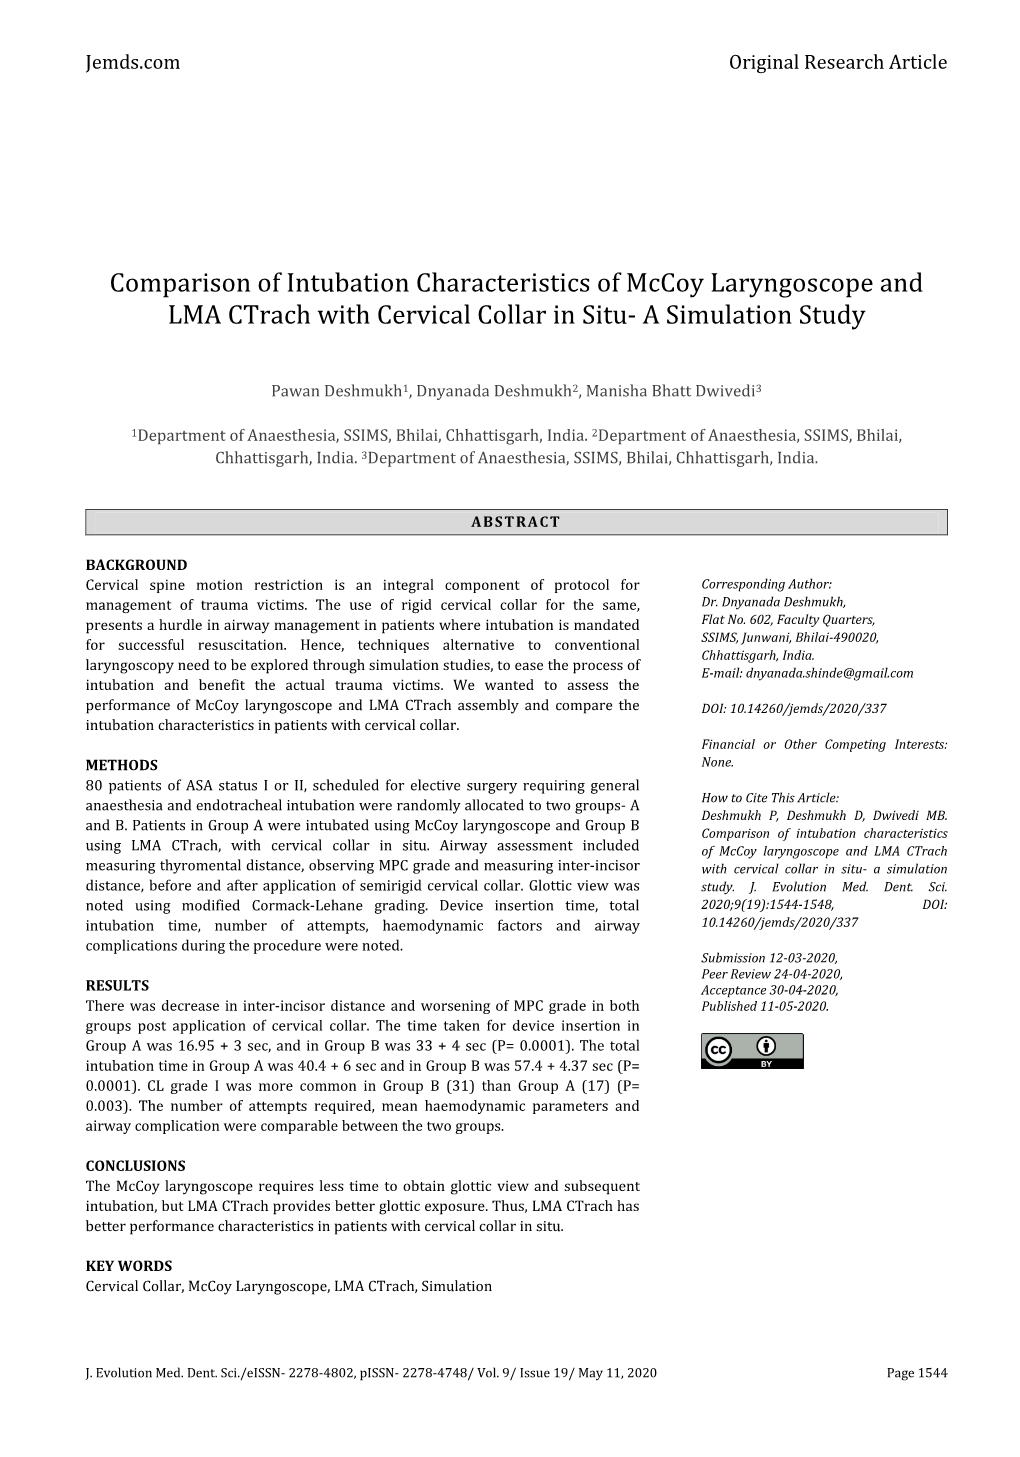 Comparison of Intubation Characteristics of Mccoy Laryngoscope and LMA Ctrach with Cervical Collar in Situ- a Simulation Study